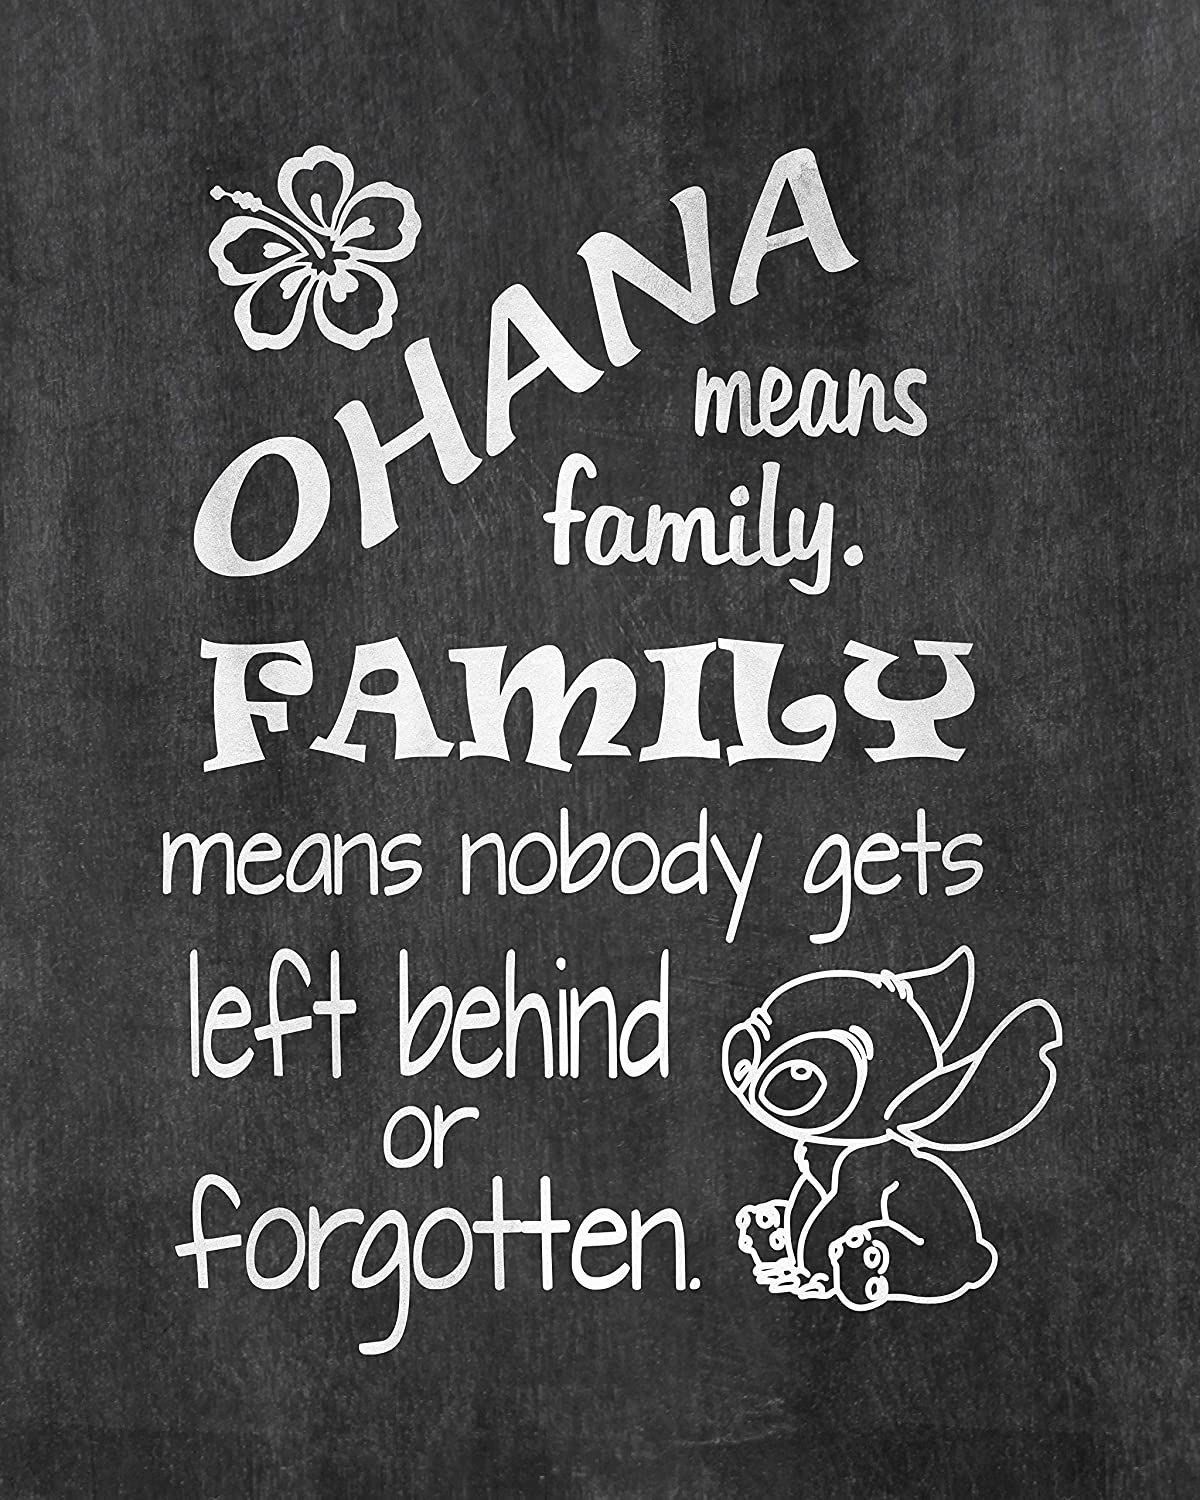 Ohana Means Family by Lilo and Stitch Background Poster Print Photo Quality in USA Inspired Art Print